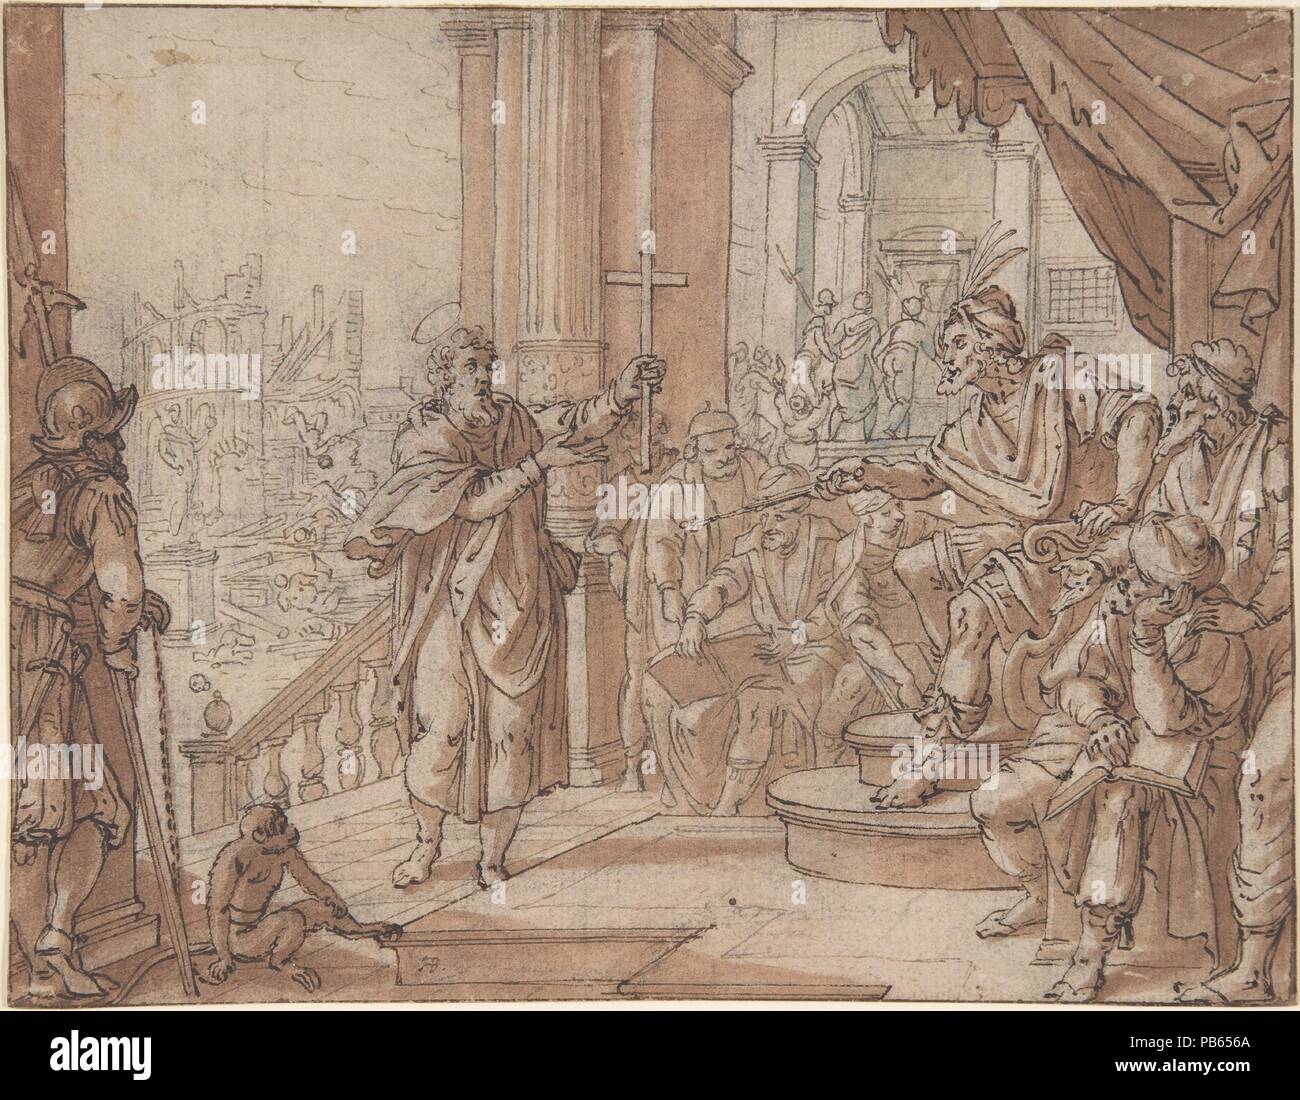 Saint John the Baptist Appearing Before Herod. Artist: Augustin Braun (German, Cologne ca. 1570-1639 Cologne). Dimensions: sheet: 6 3/4 x 8 11/16 in. (17.2 x 22.1 cm). Date: late 16th-mid 17th century. Museum: Metropolitan Museum of Art, New York, USA. Stock Photo